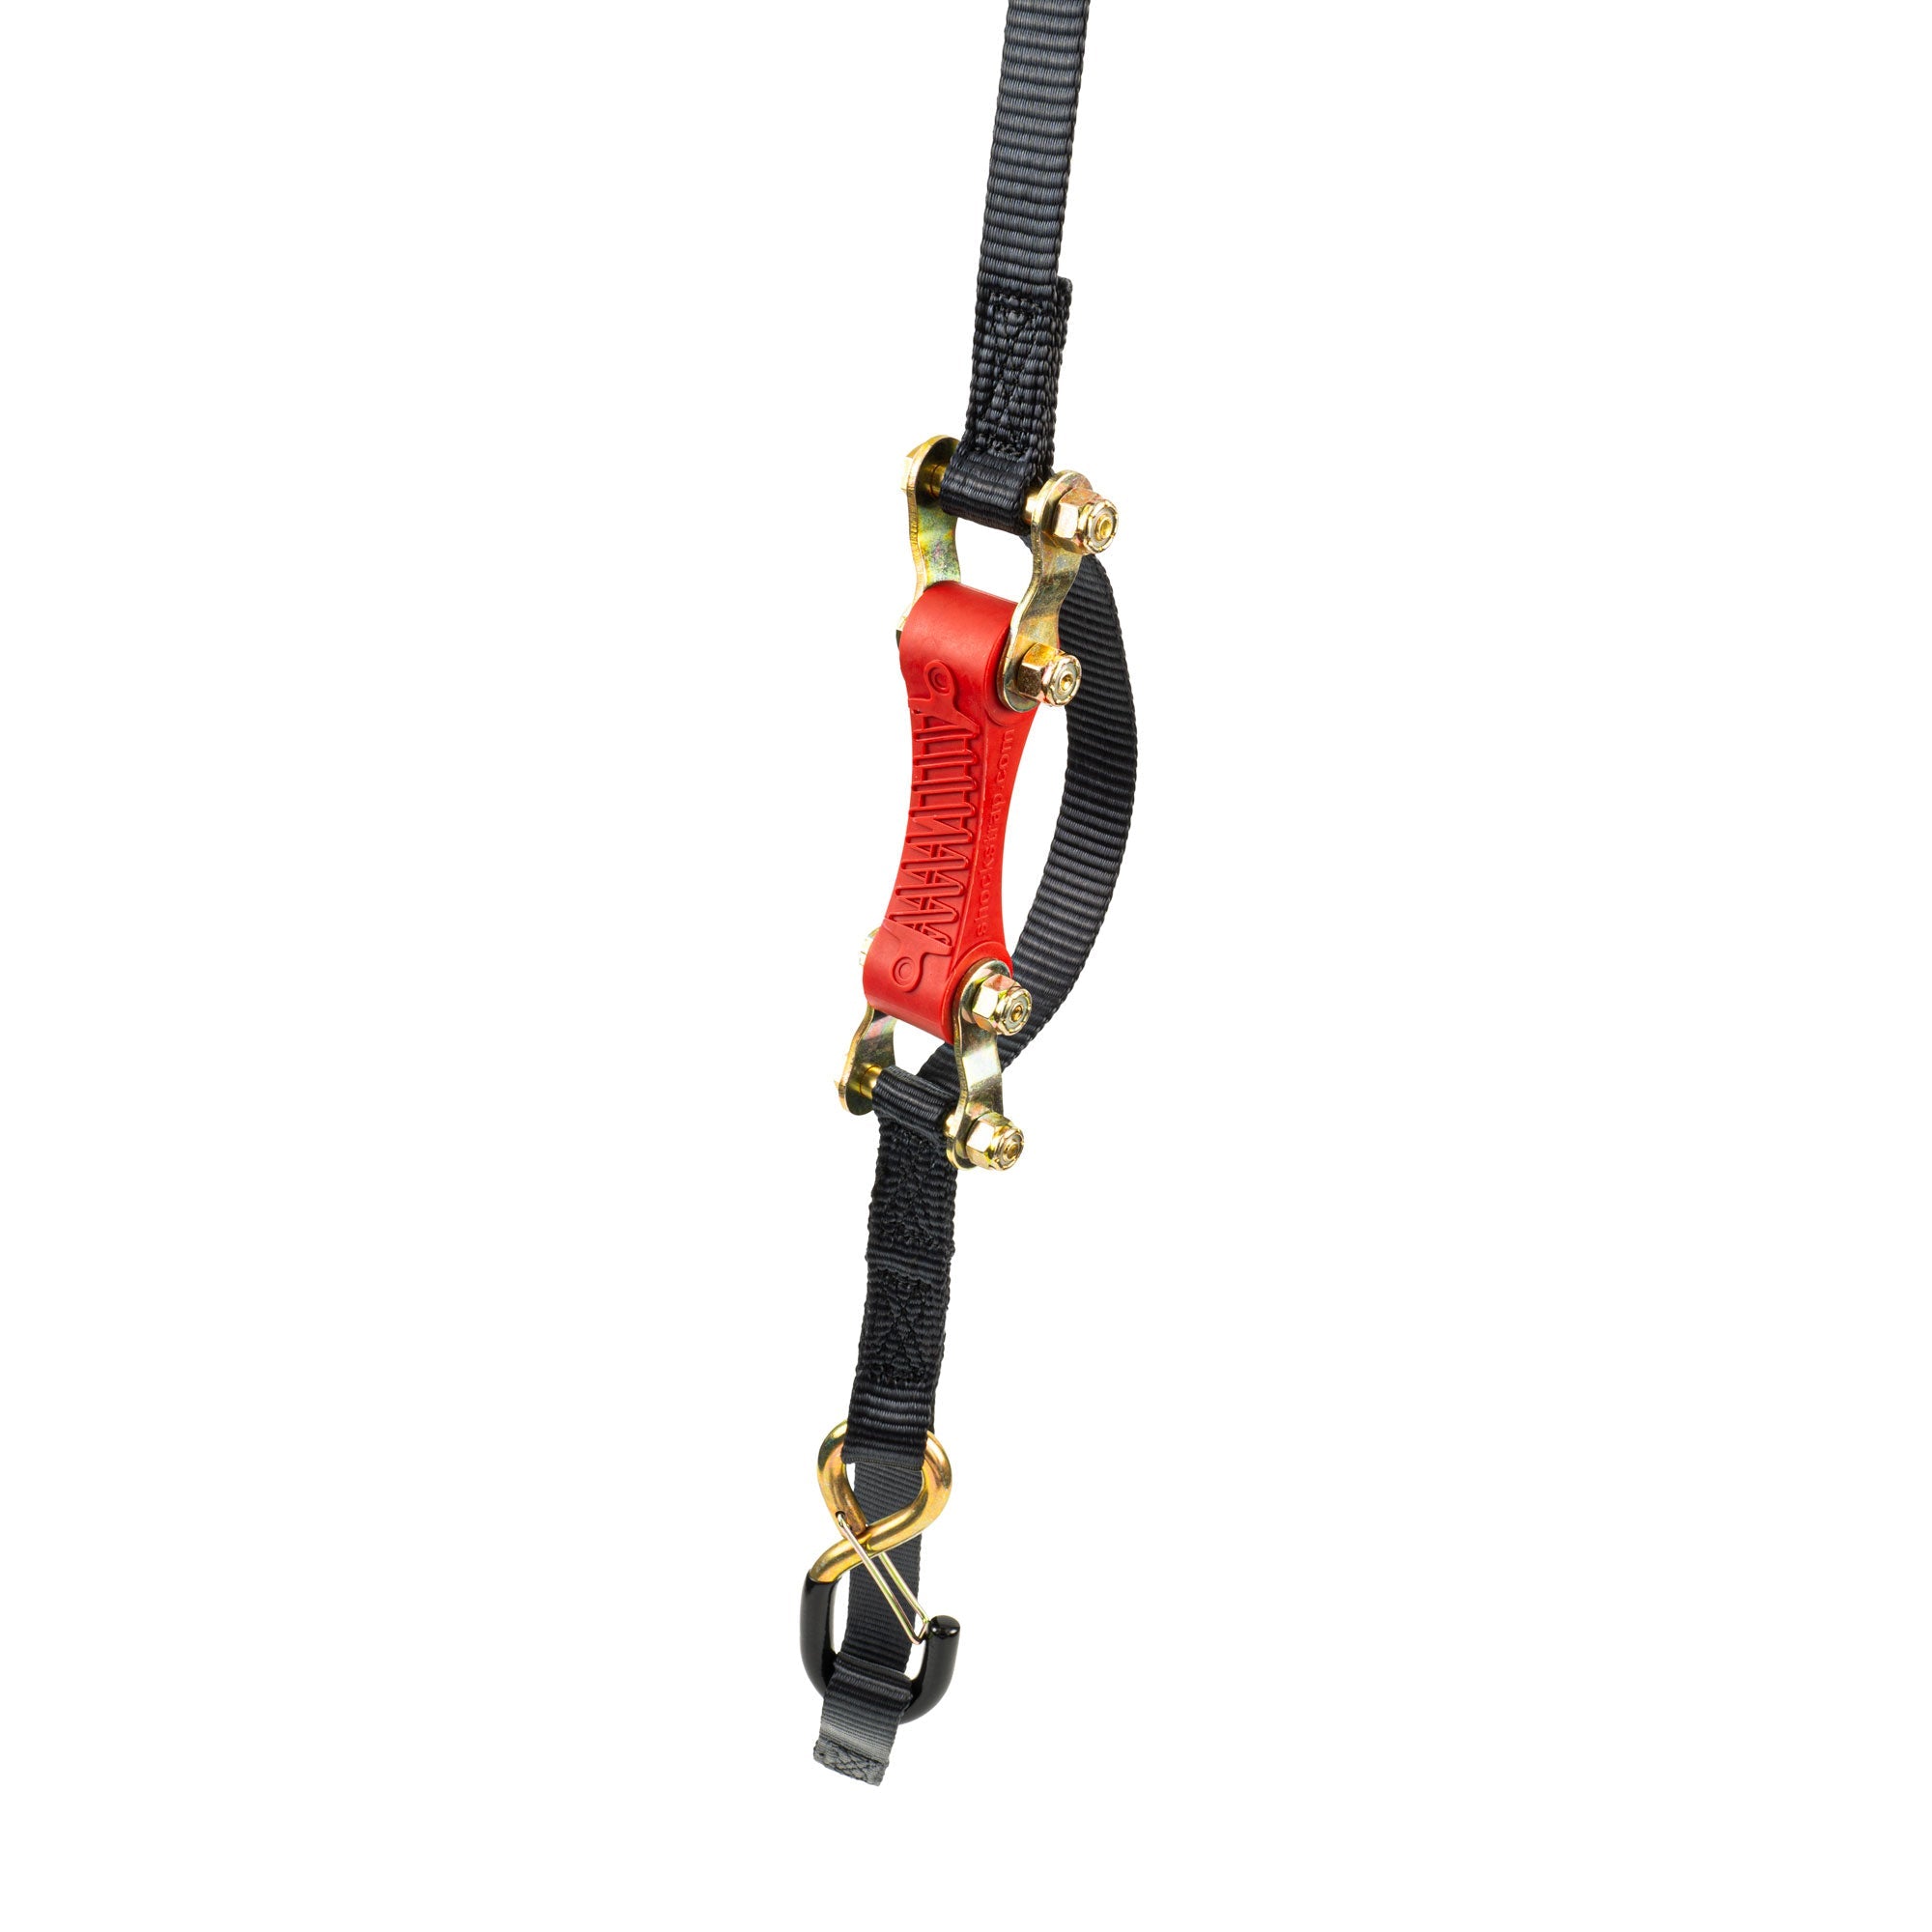 10ft x 1in ShockStrap Ratchet Strap, Premium Polyester Webbing, 1,500lb Break Strength, 500lb Working Load Limit - The Perfect Bungee & ShockStrap Tie Downs